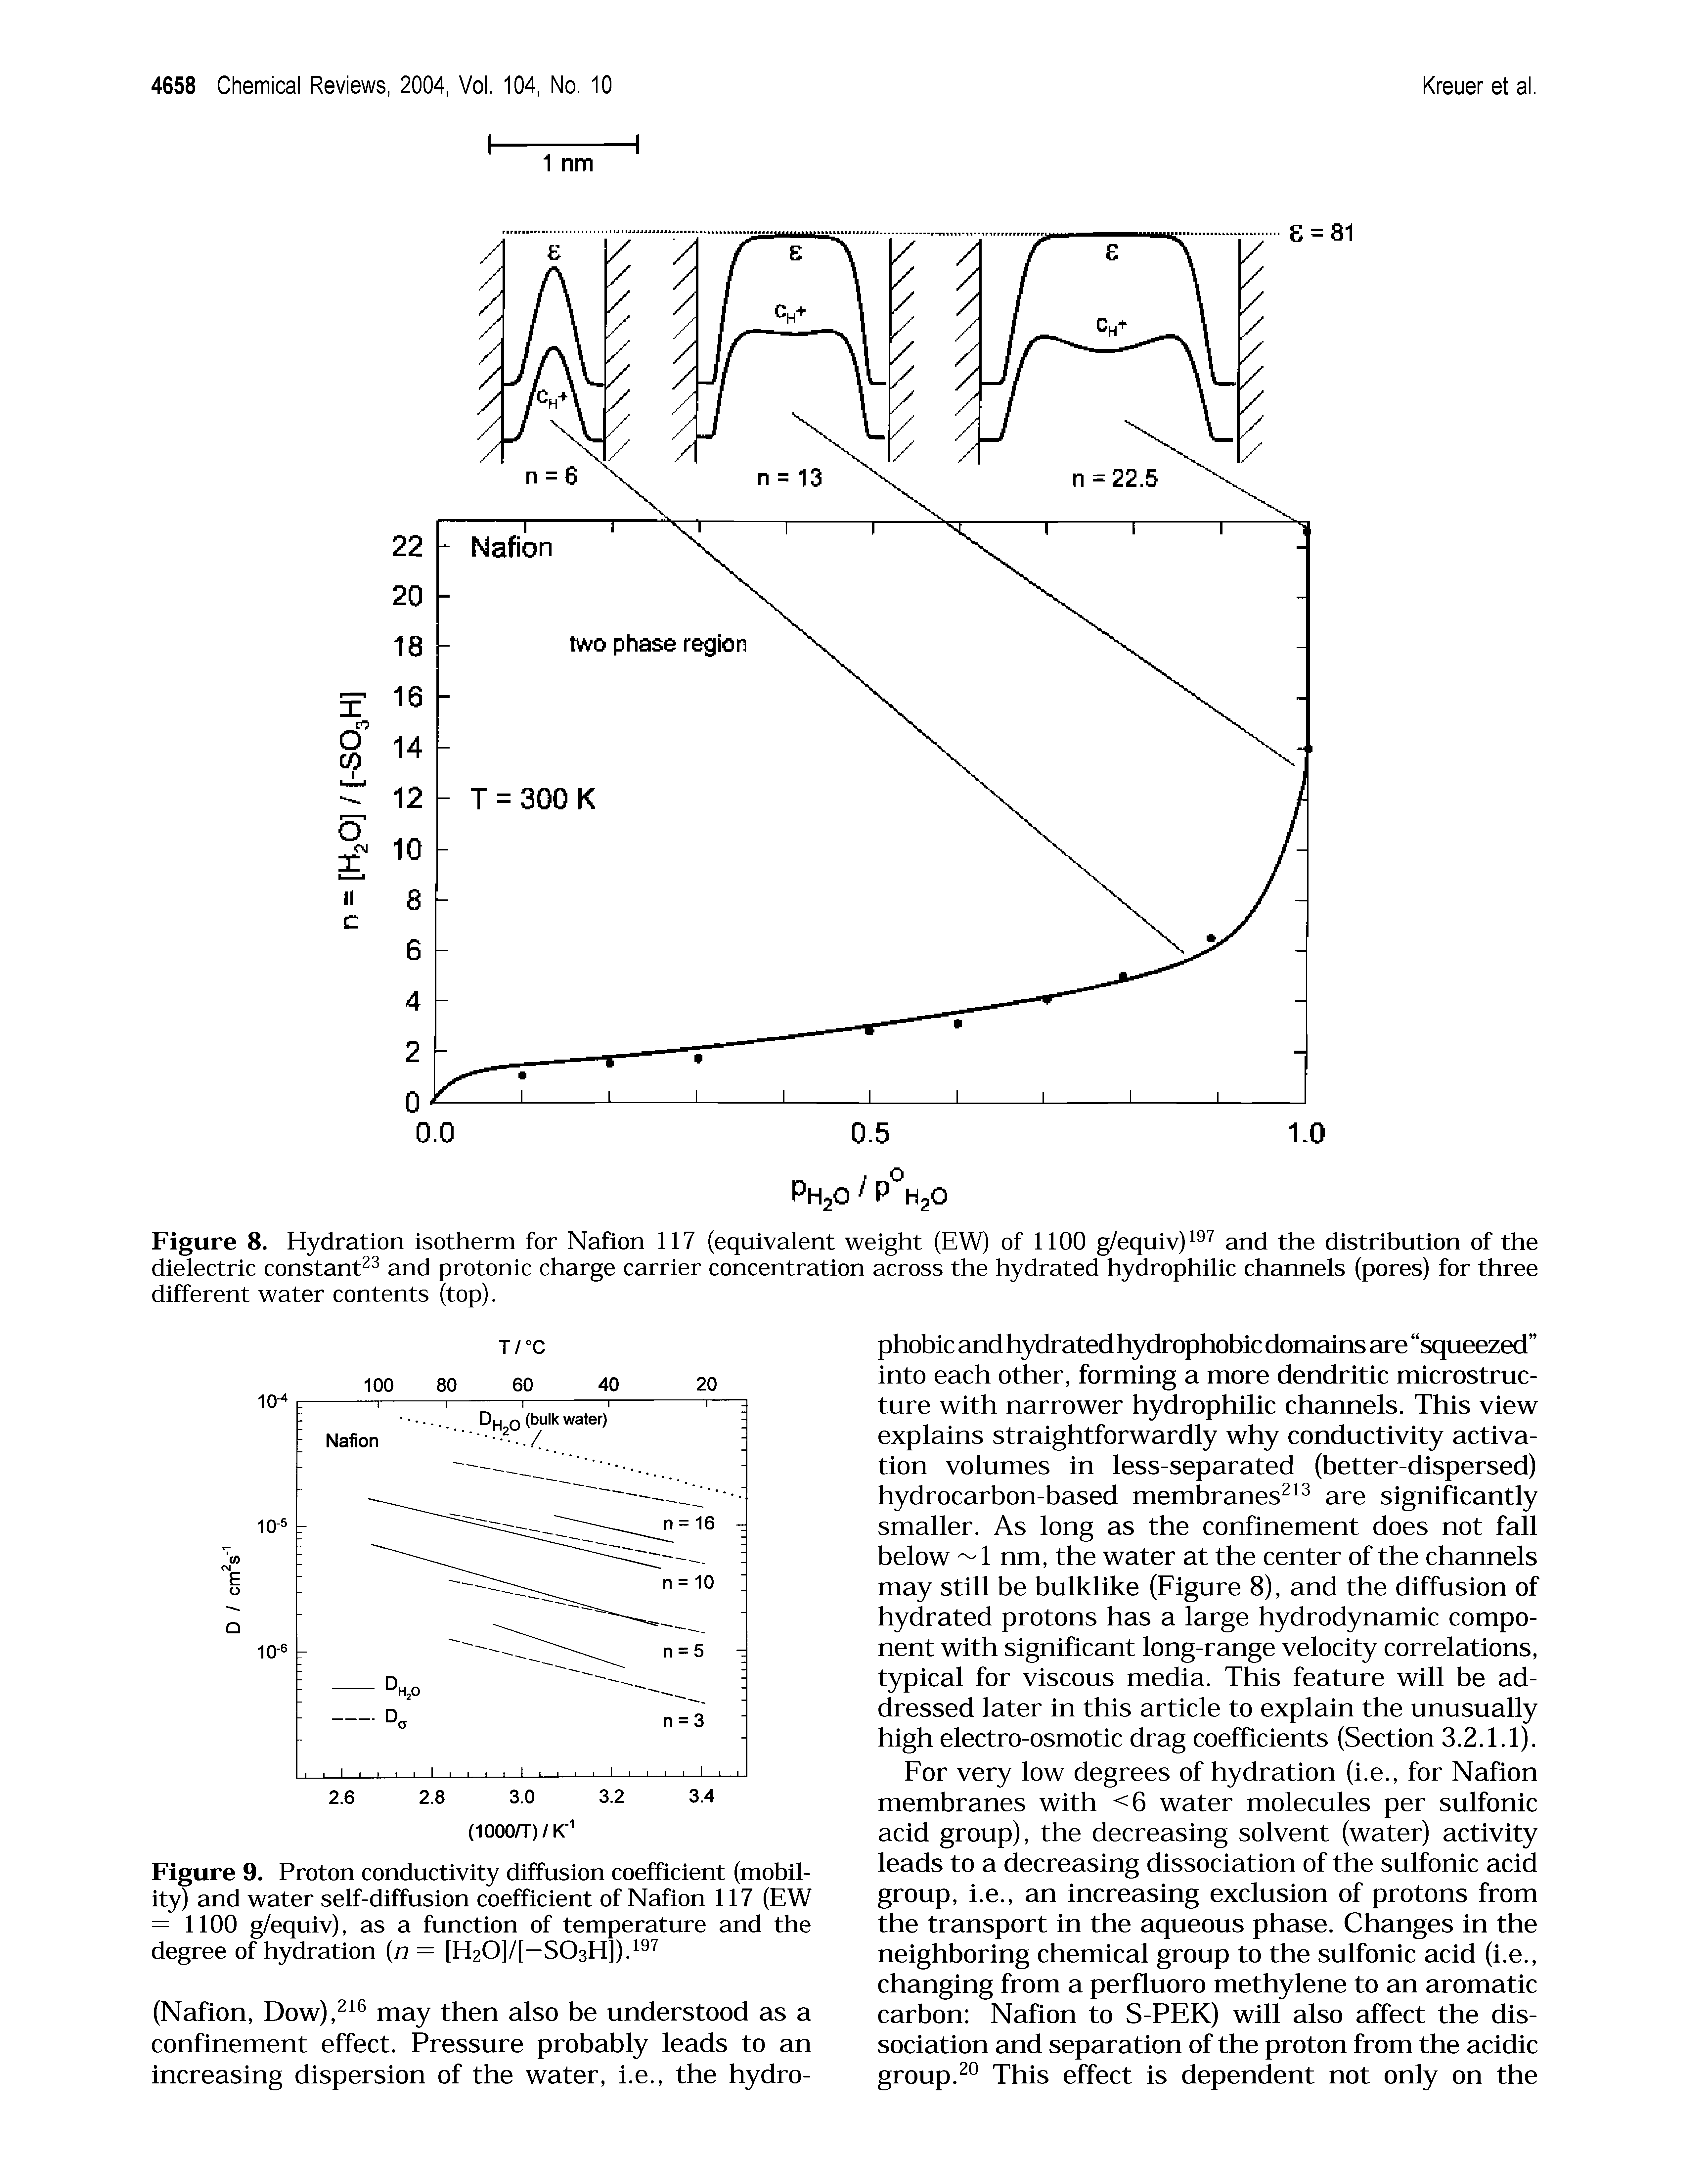 Figure 8. Hydration isotherm for Nation 117 (equivalent weight (EW) of 1100 g/equiv) and the distribution of the dielectric constant and protonic charge carrier concentration across the hydrated hydrophilic channels (pores) for three different water contents (top).